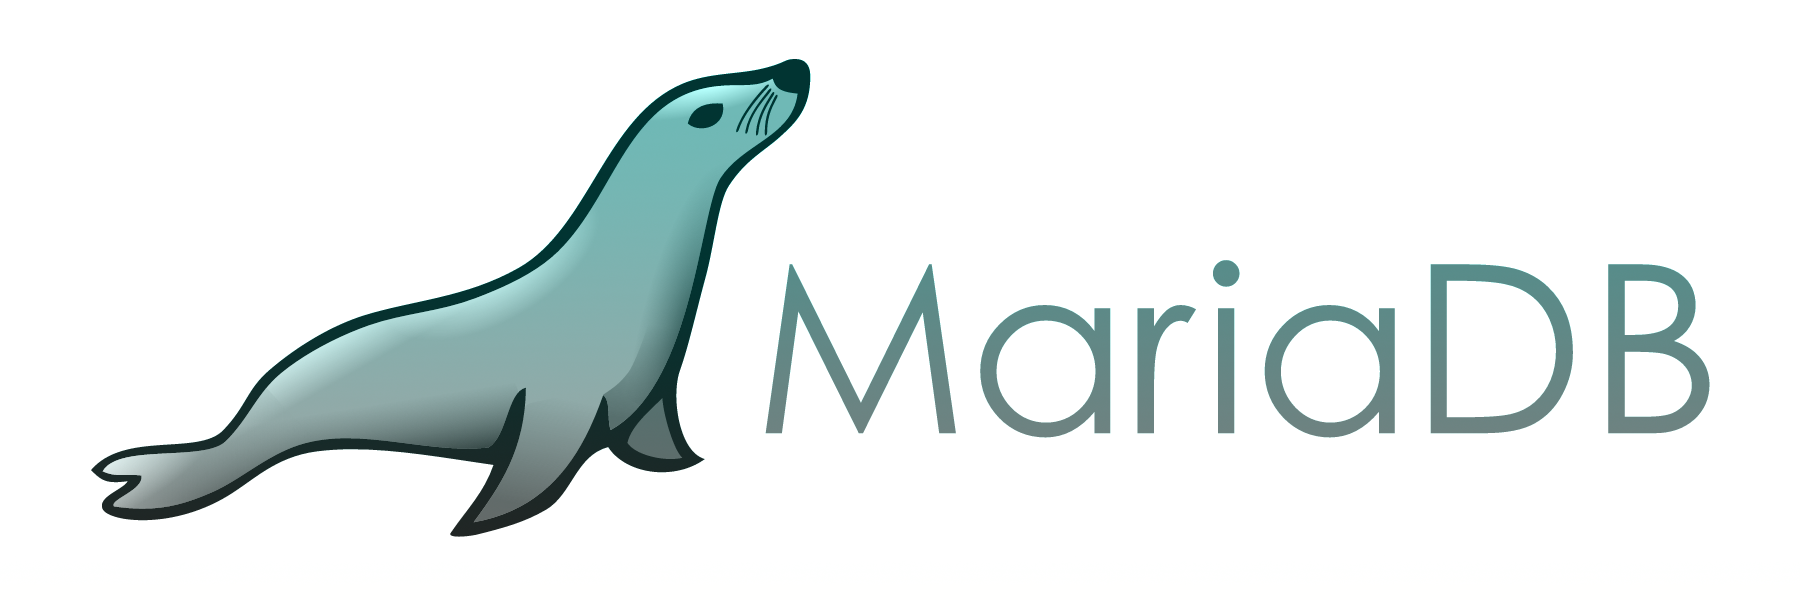 How to Install and Secure MariaDB 10 in CentOS 7